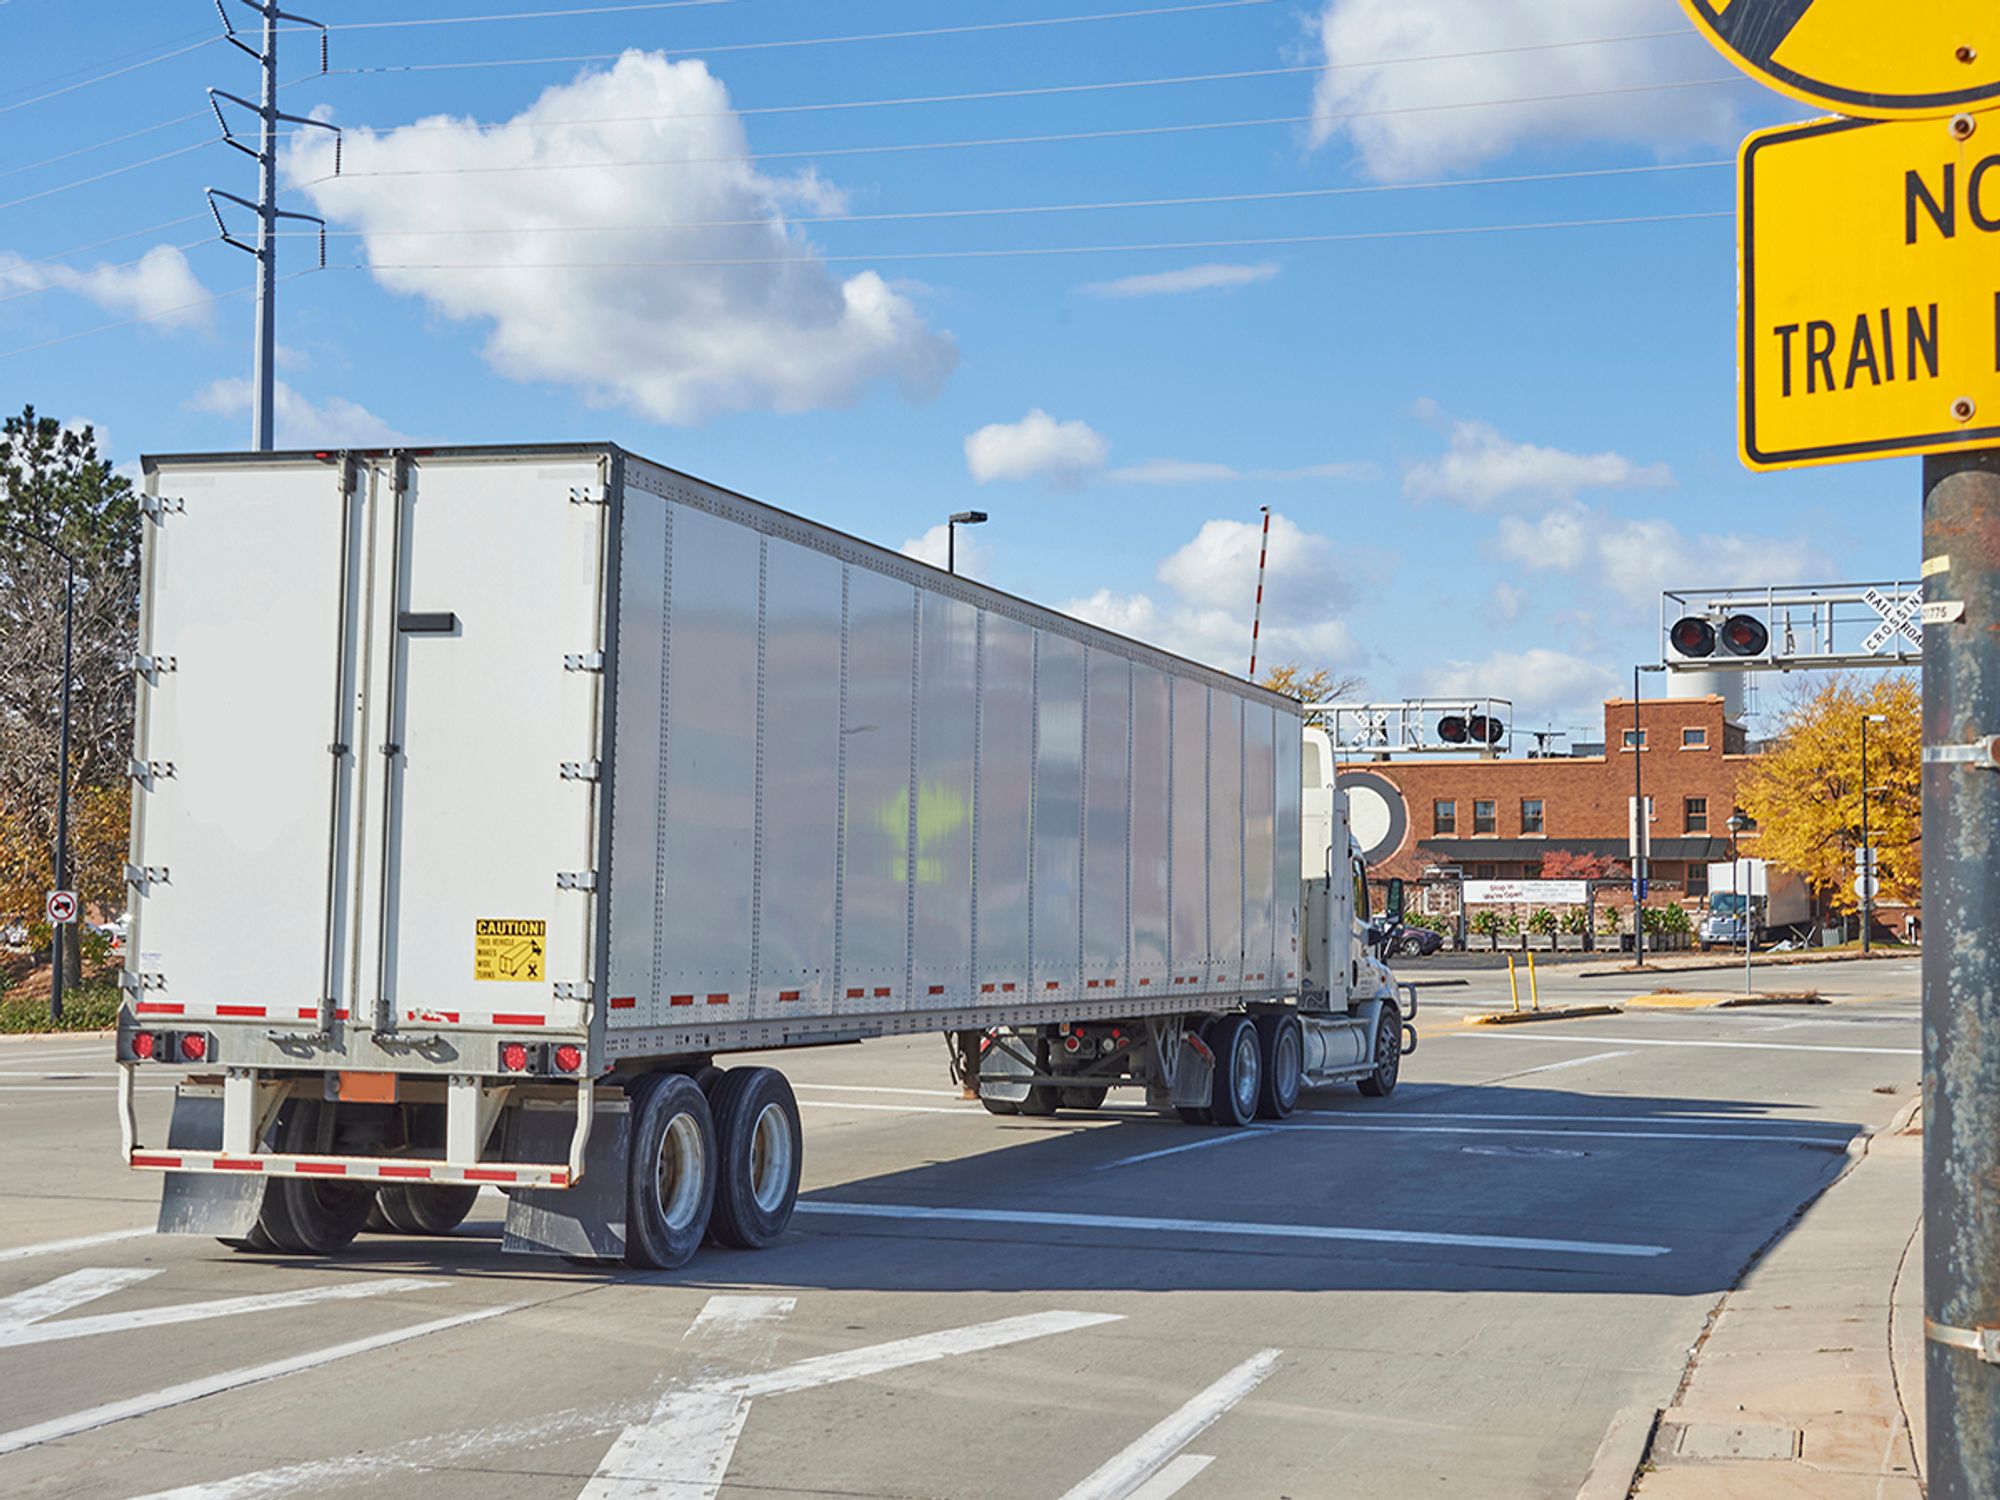 Operational requirements: railroad crossings and hazardous driving conditions